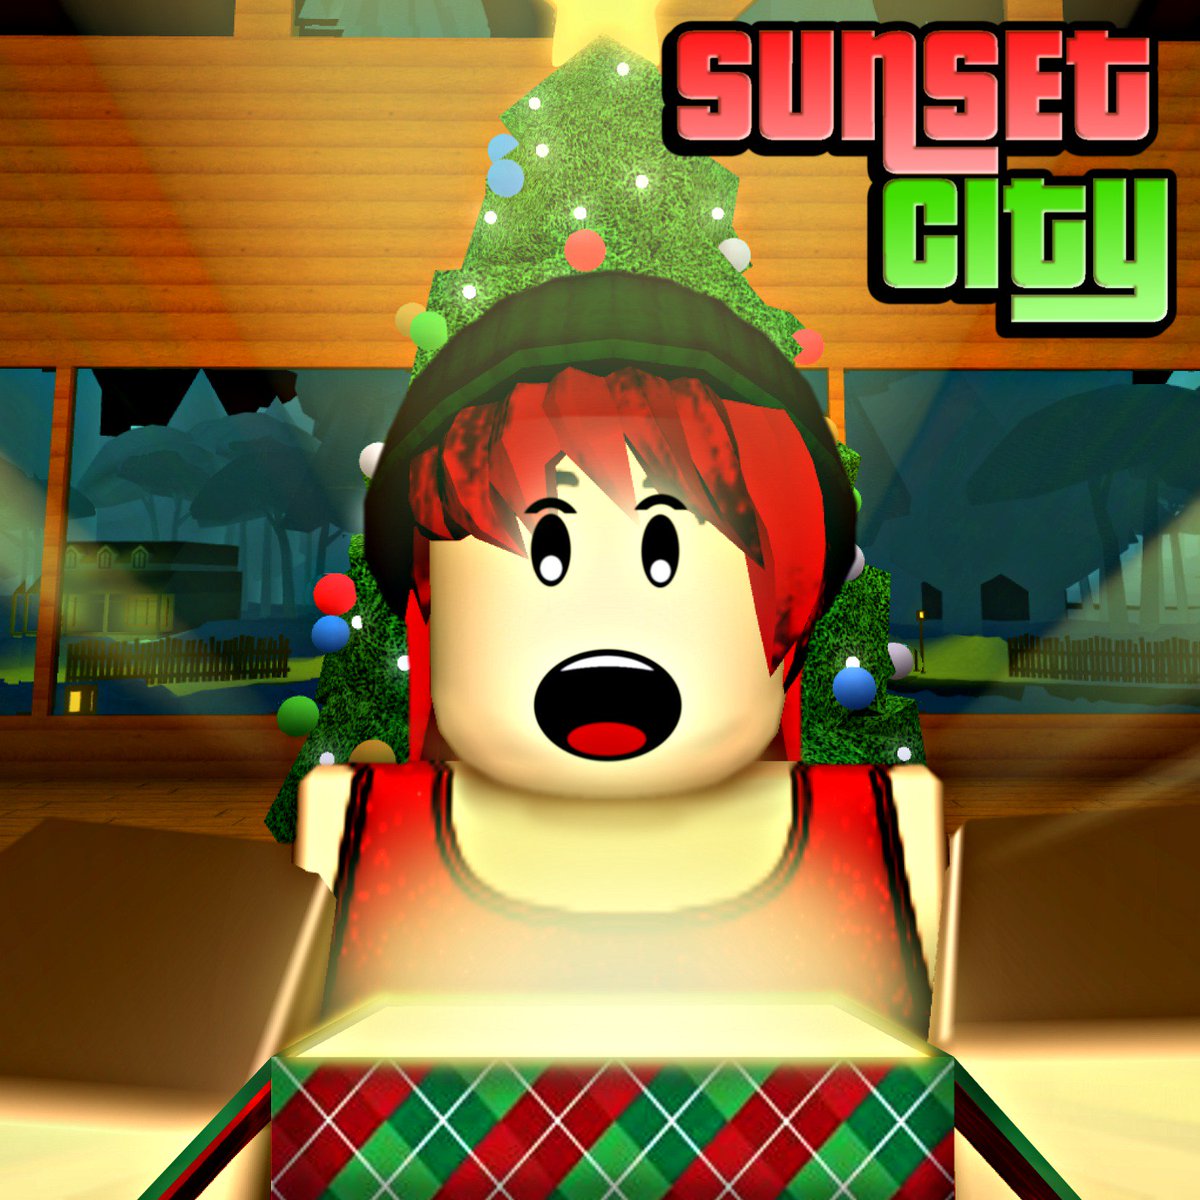 Sonicthehedgehogxx On Twitter Sunset City Christmas Update Is Now Live Winter Theme 10 New Furniture Collect Gifts Around The Map For Veza Play Https T Co Jucglodq33 Roblox Robloxdev Merrychristmas Https T Co 22fdkw1av3 - roblox twitter gifts